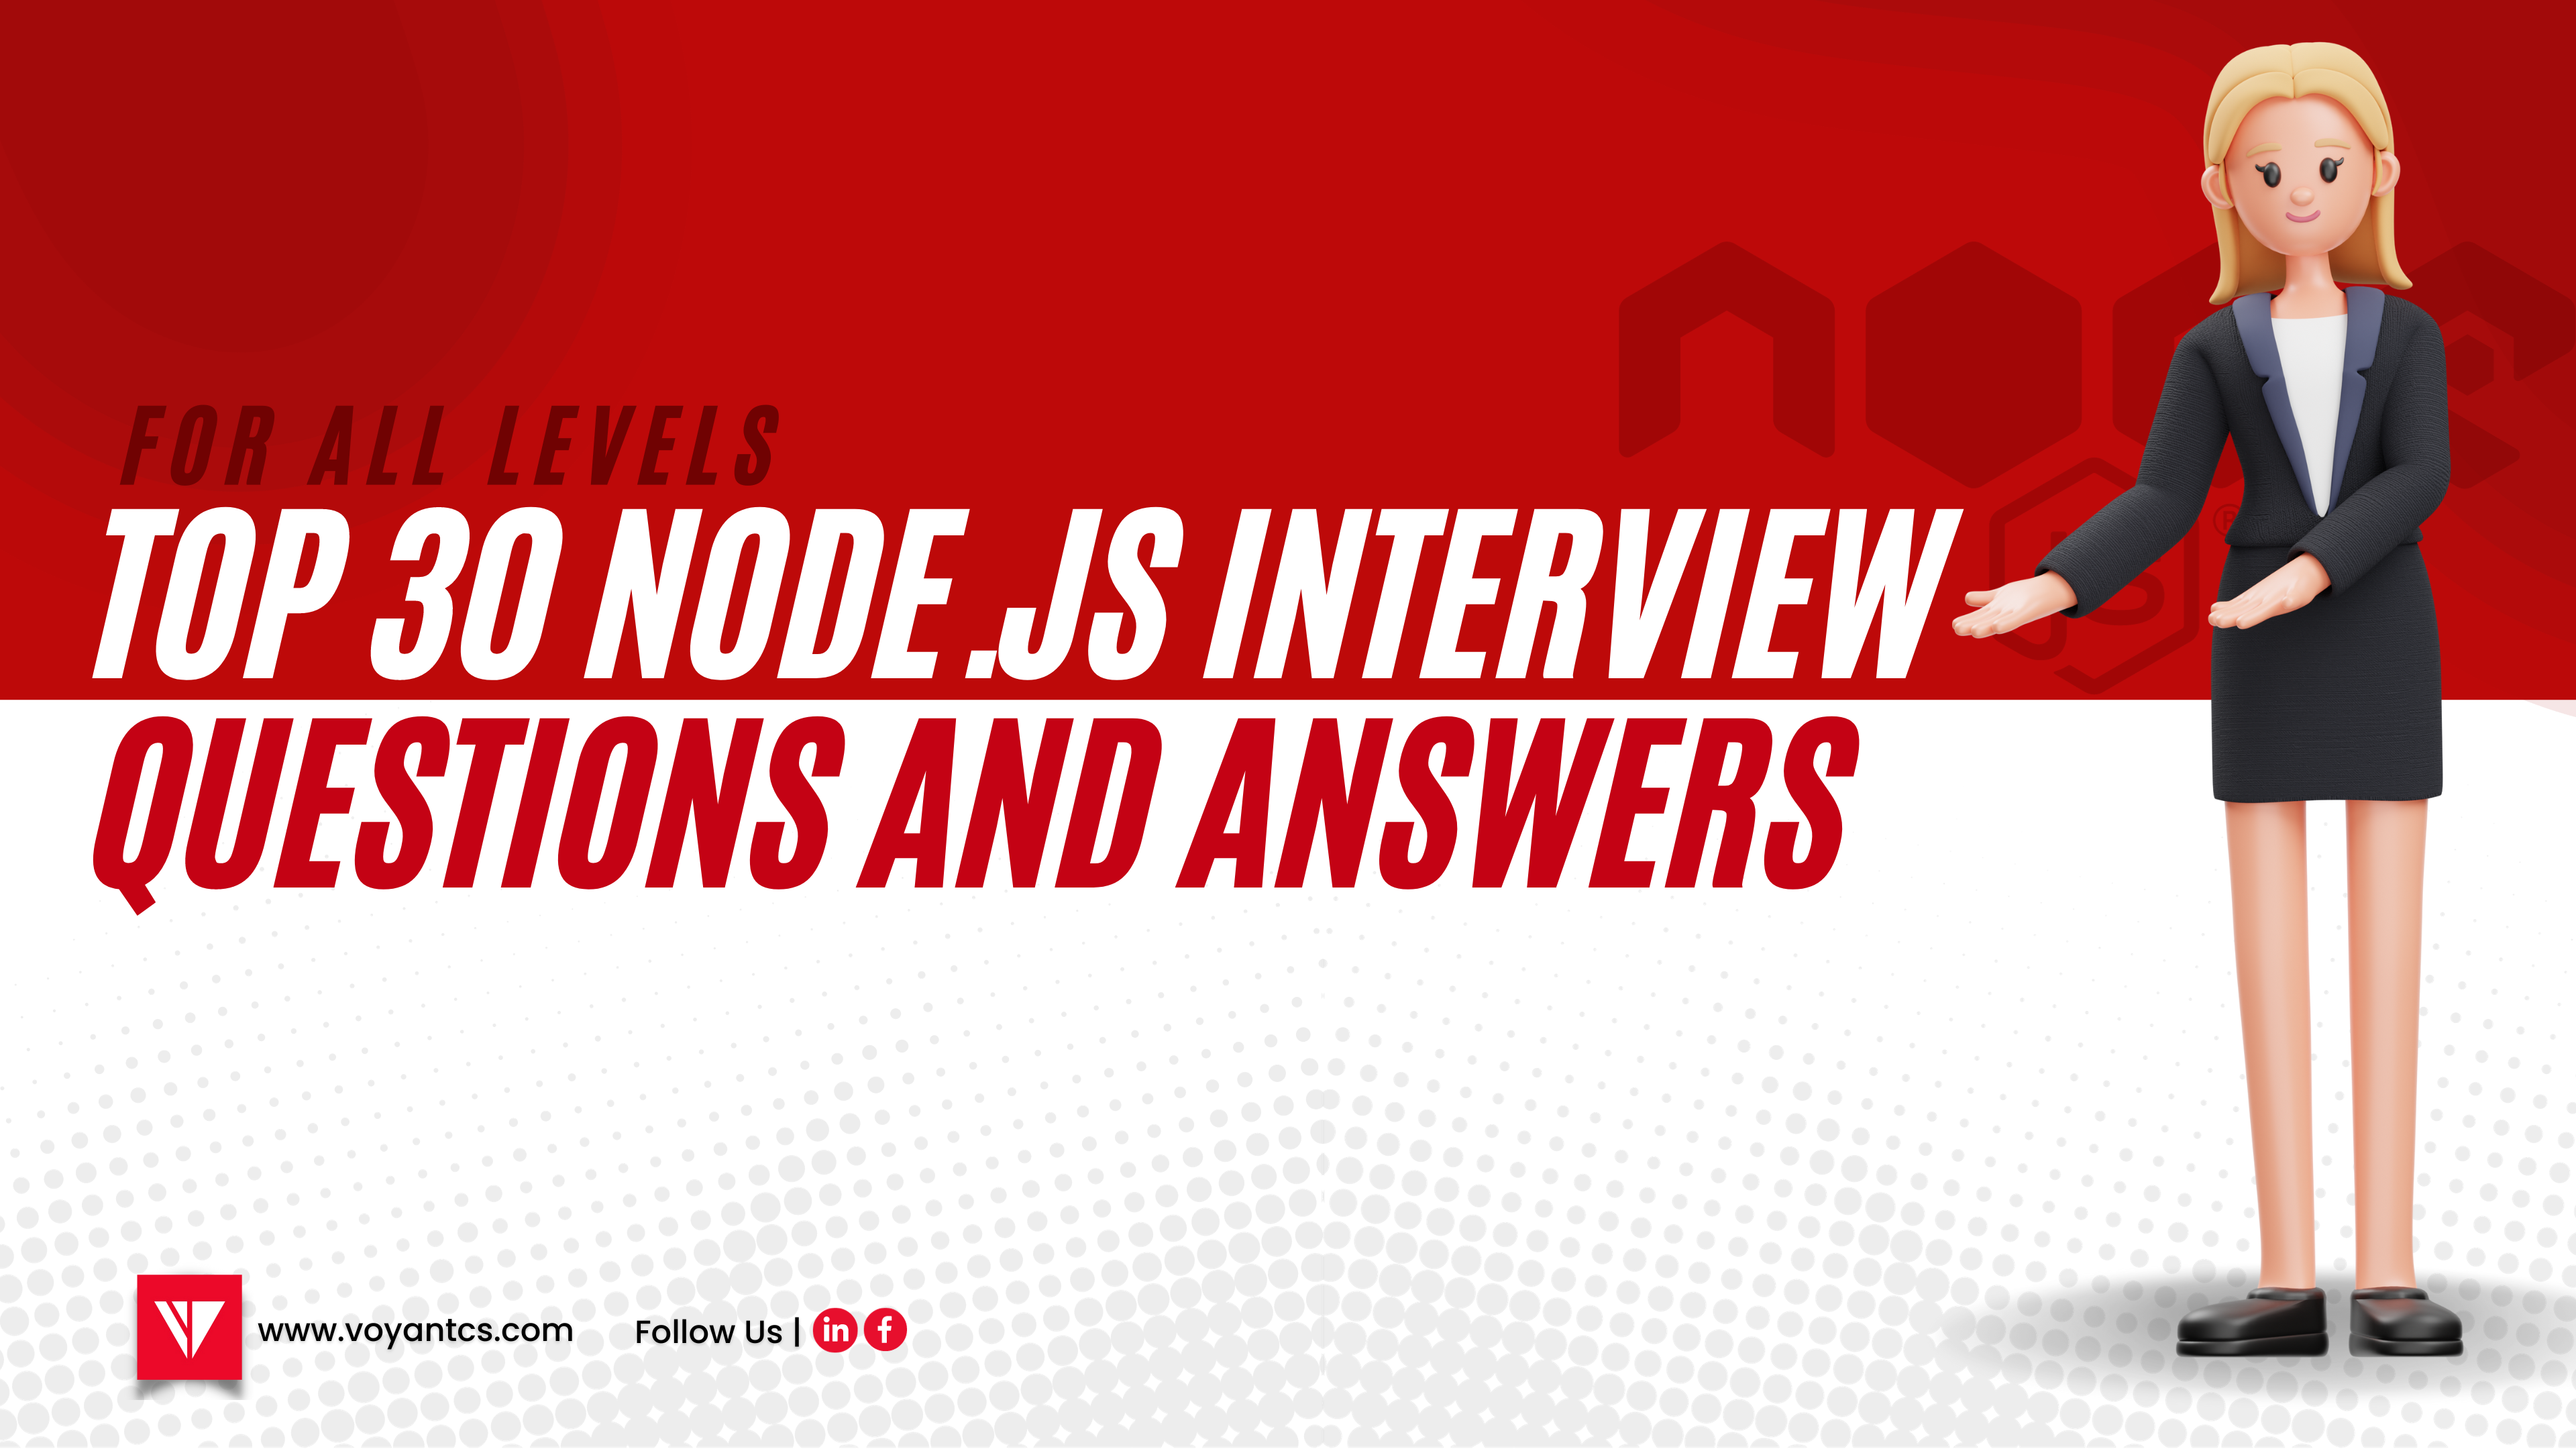 Top 30 Node.js Interview Questions and Answers [For All Levels]